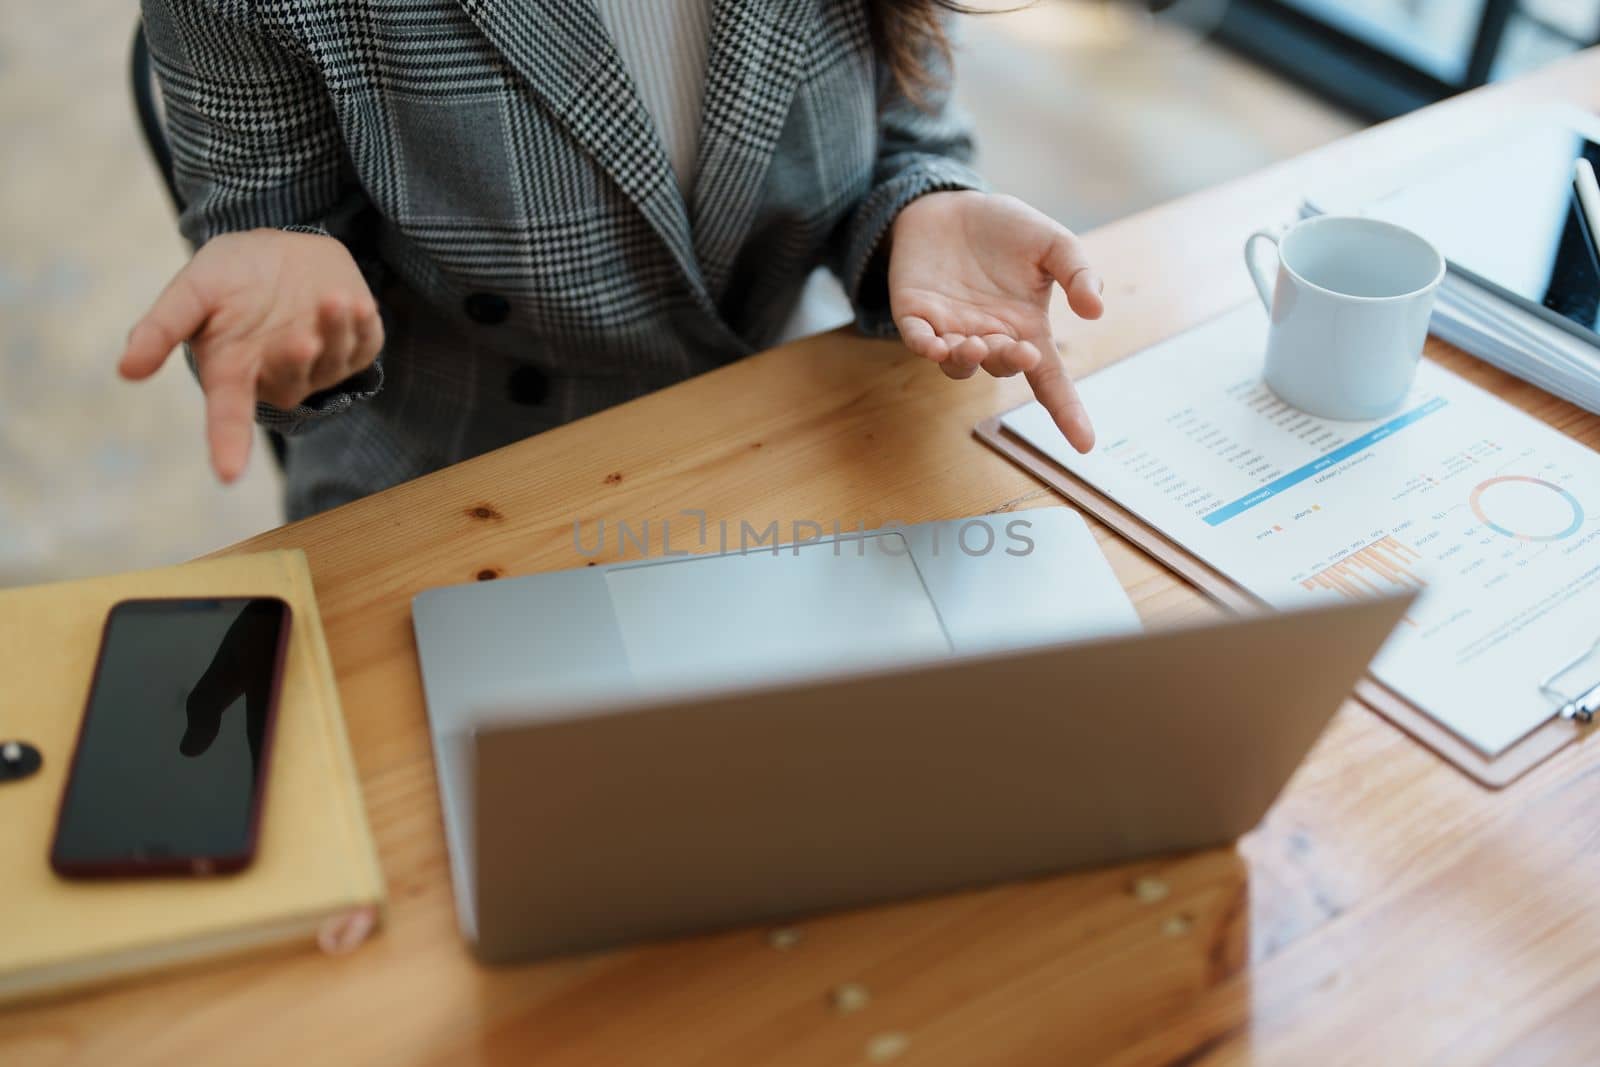 Business work and planning, portrait of a businesswoman using a computer in a meeting by Manastrong